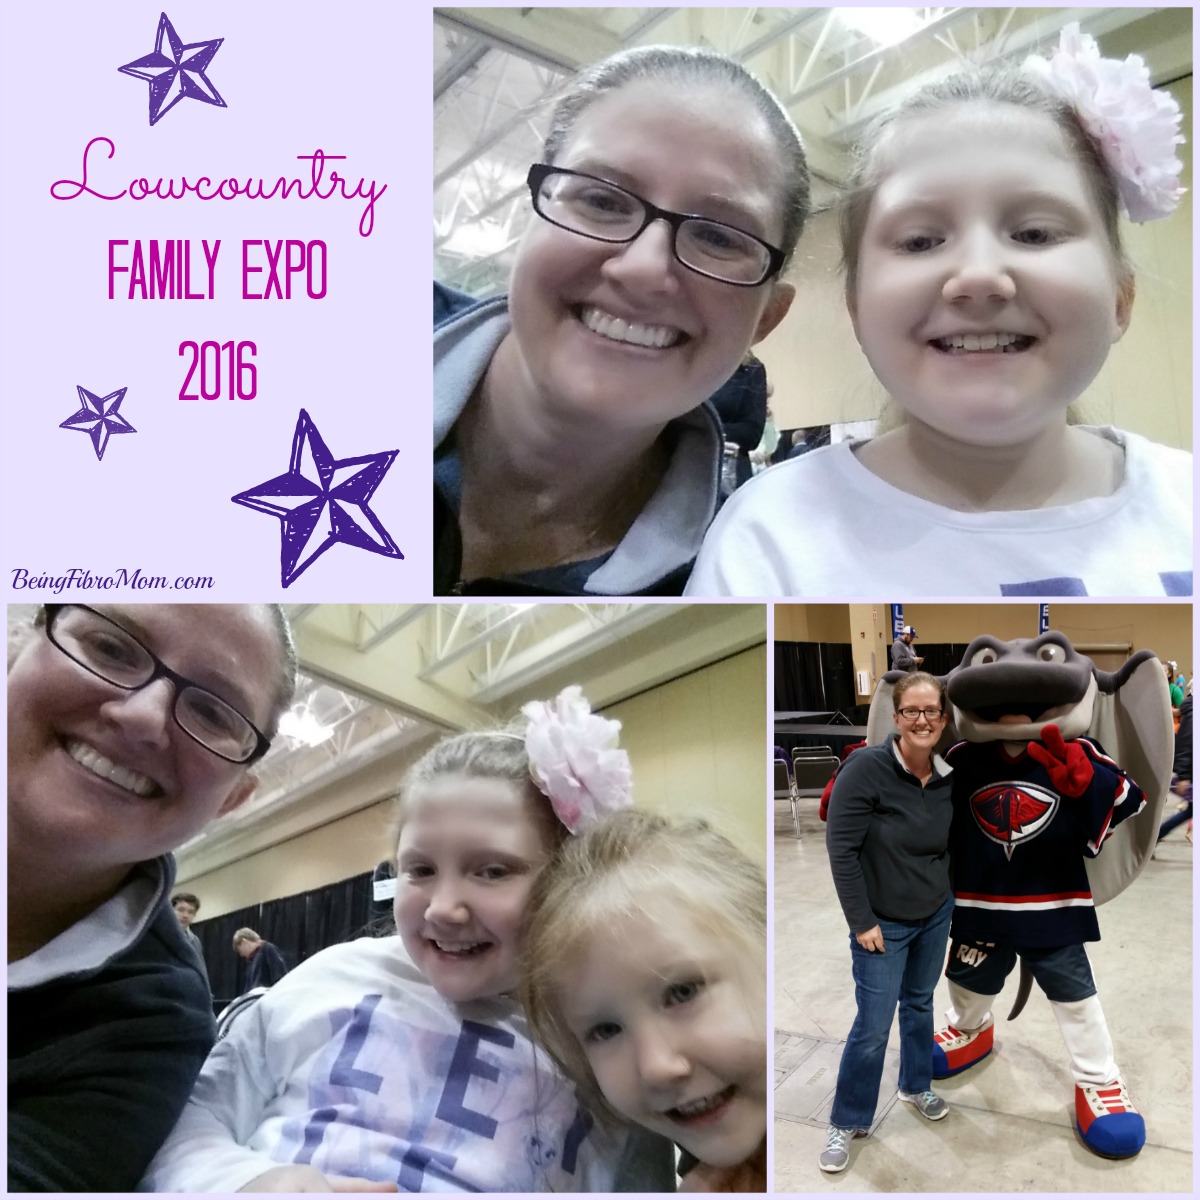 Lowcountry Family Expo 2016 #lowcountry #familyexpo #parents